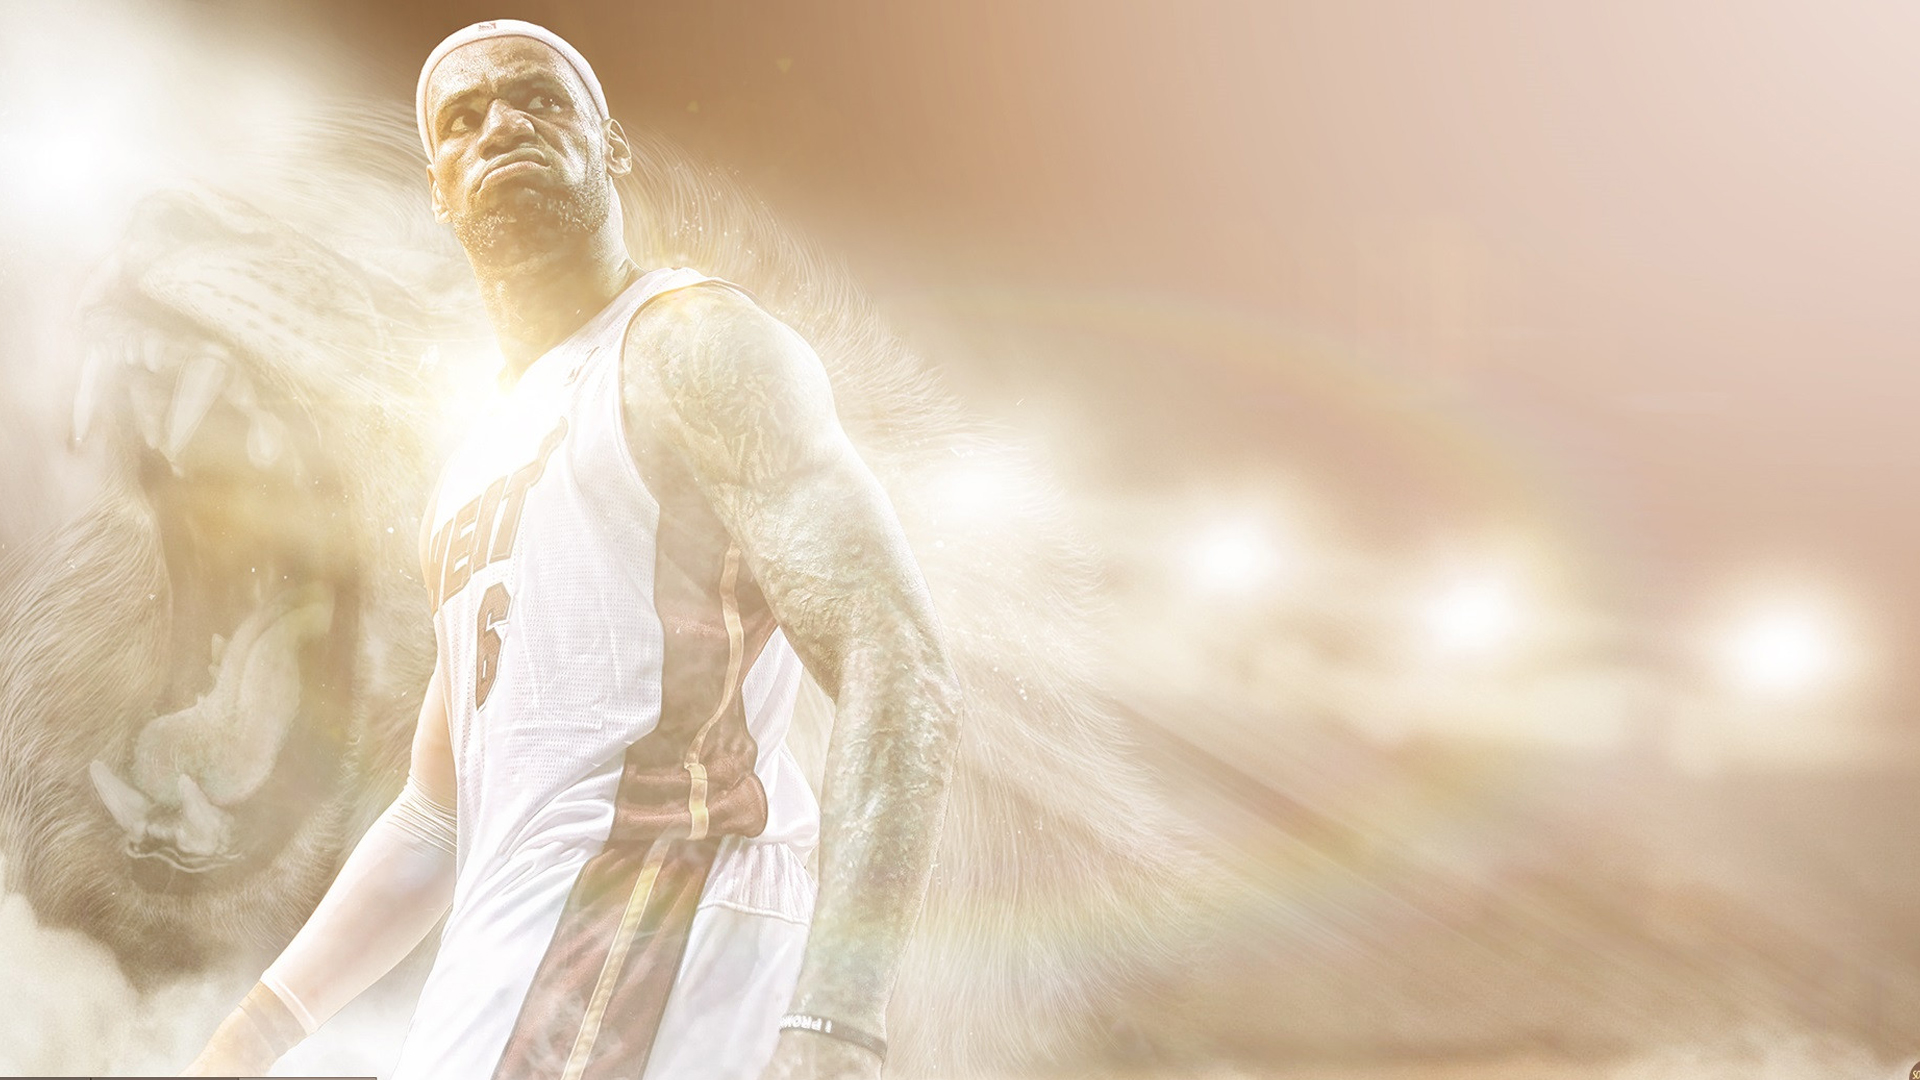 Miami Heat Lebron James Is Wearing White Dress With Lion Face Aside Basketball HD